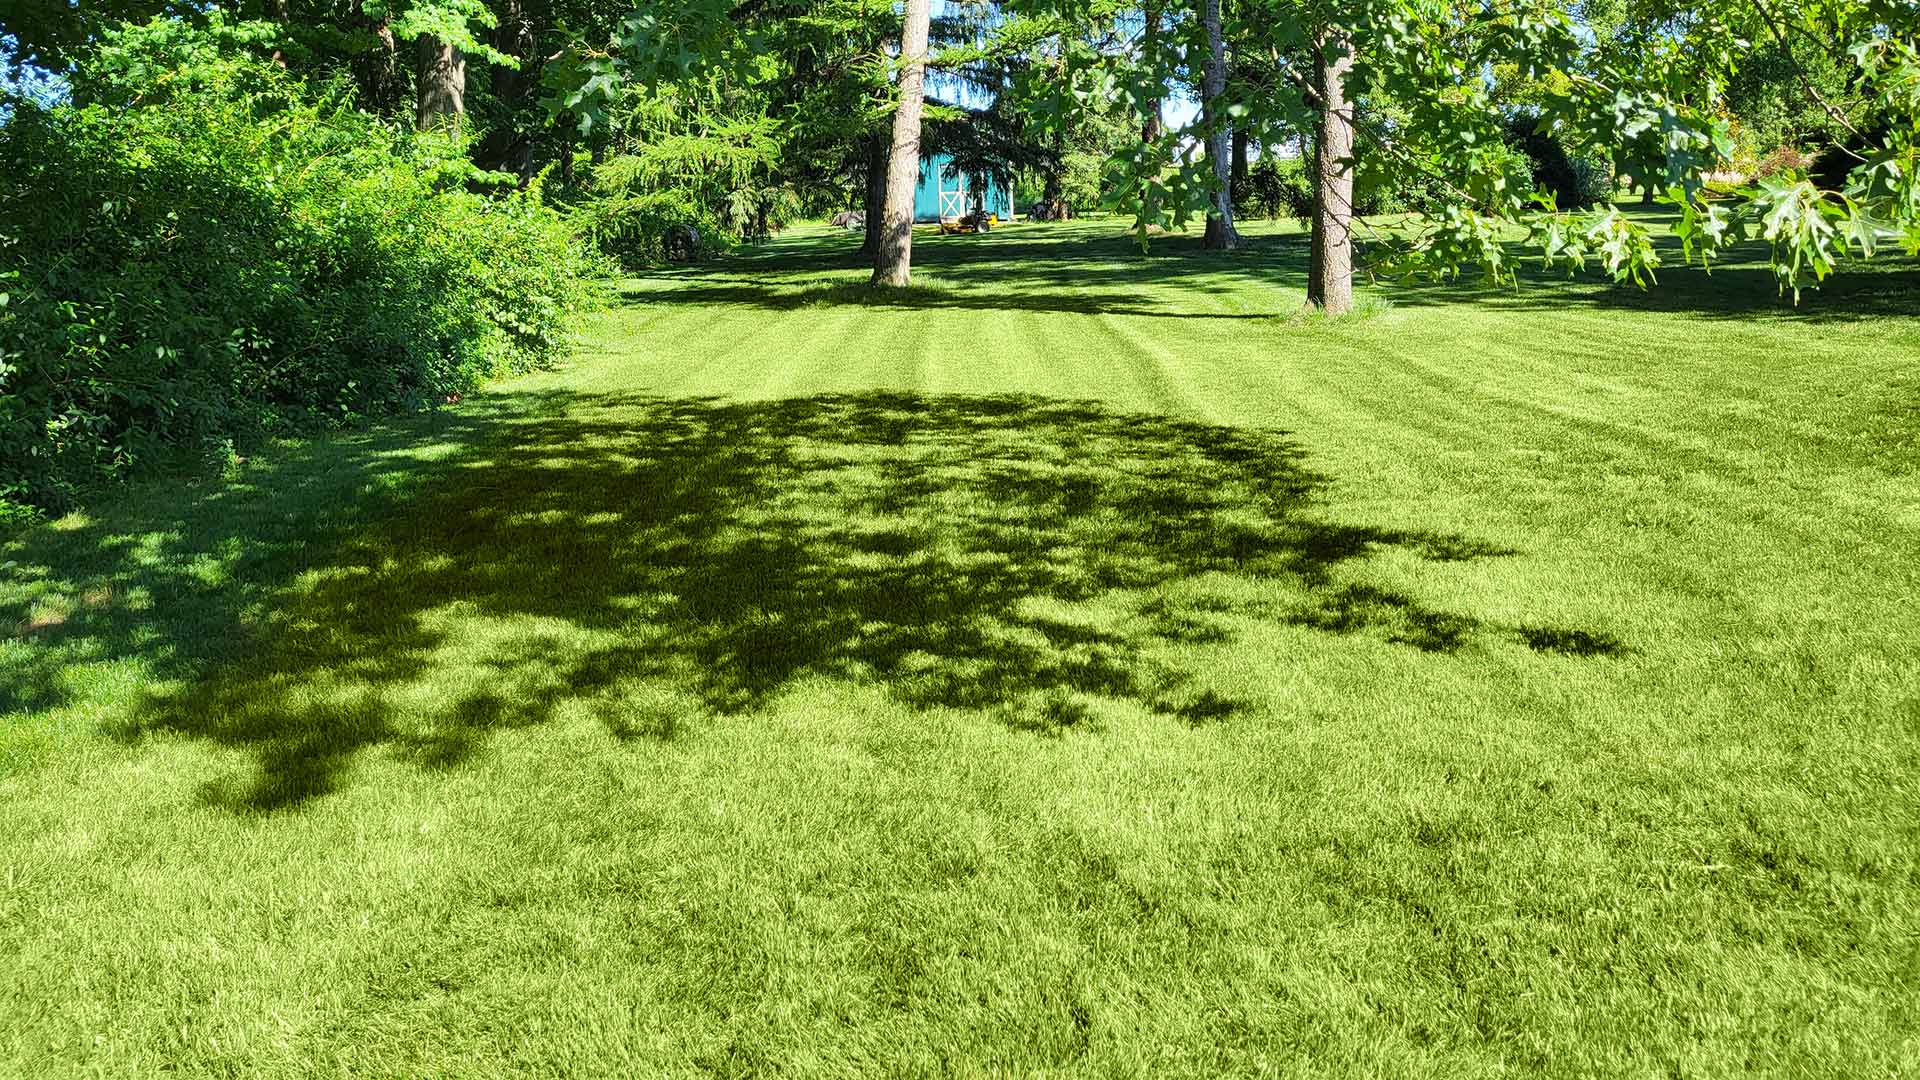 Deep green lawn under the shade of trees near Doylestown, PA.